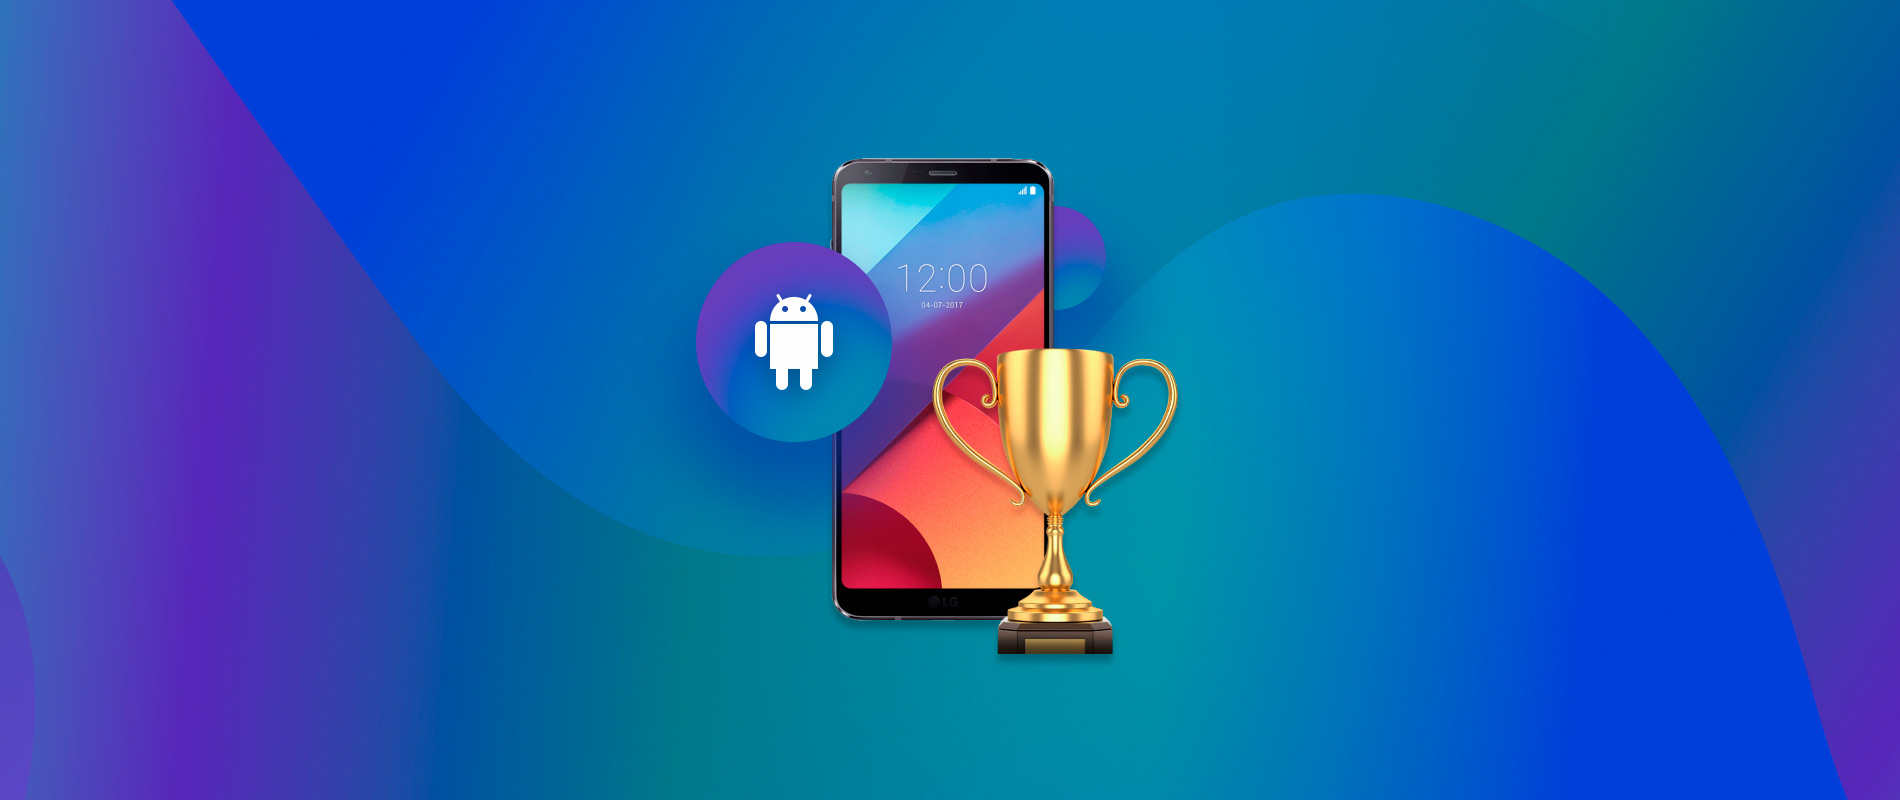 Top 7 Best Android Data Recovery Software That Actually Work in 2022